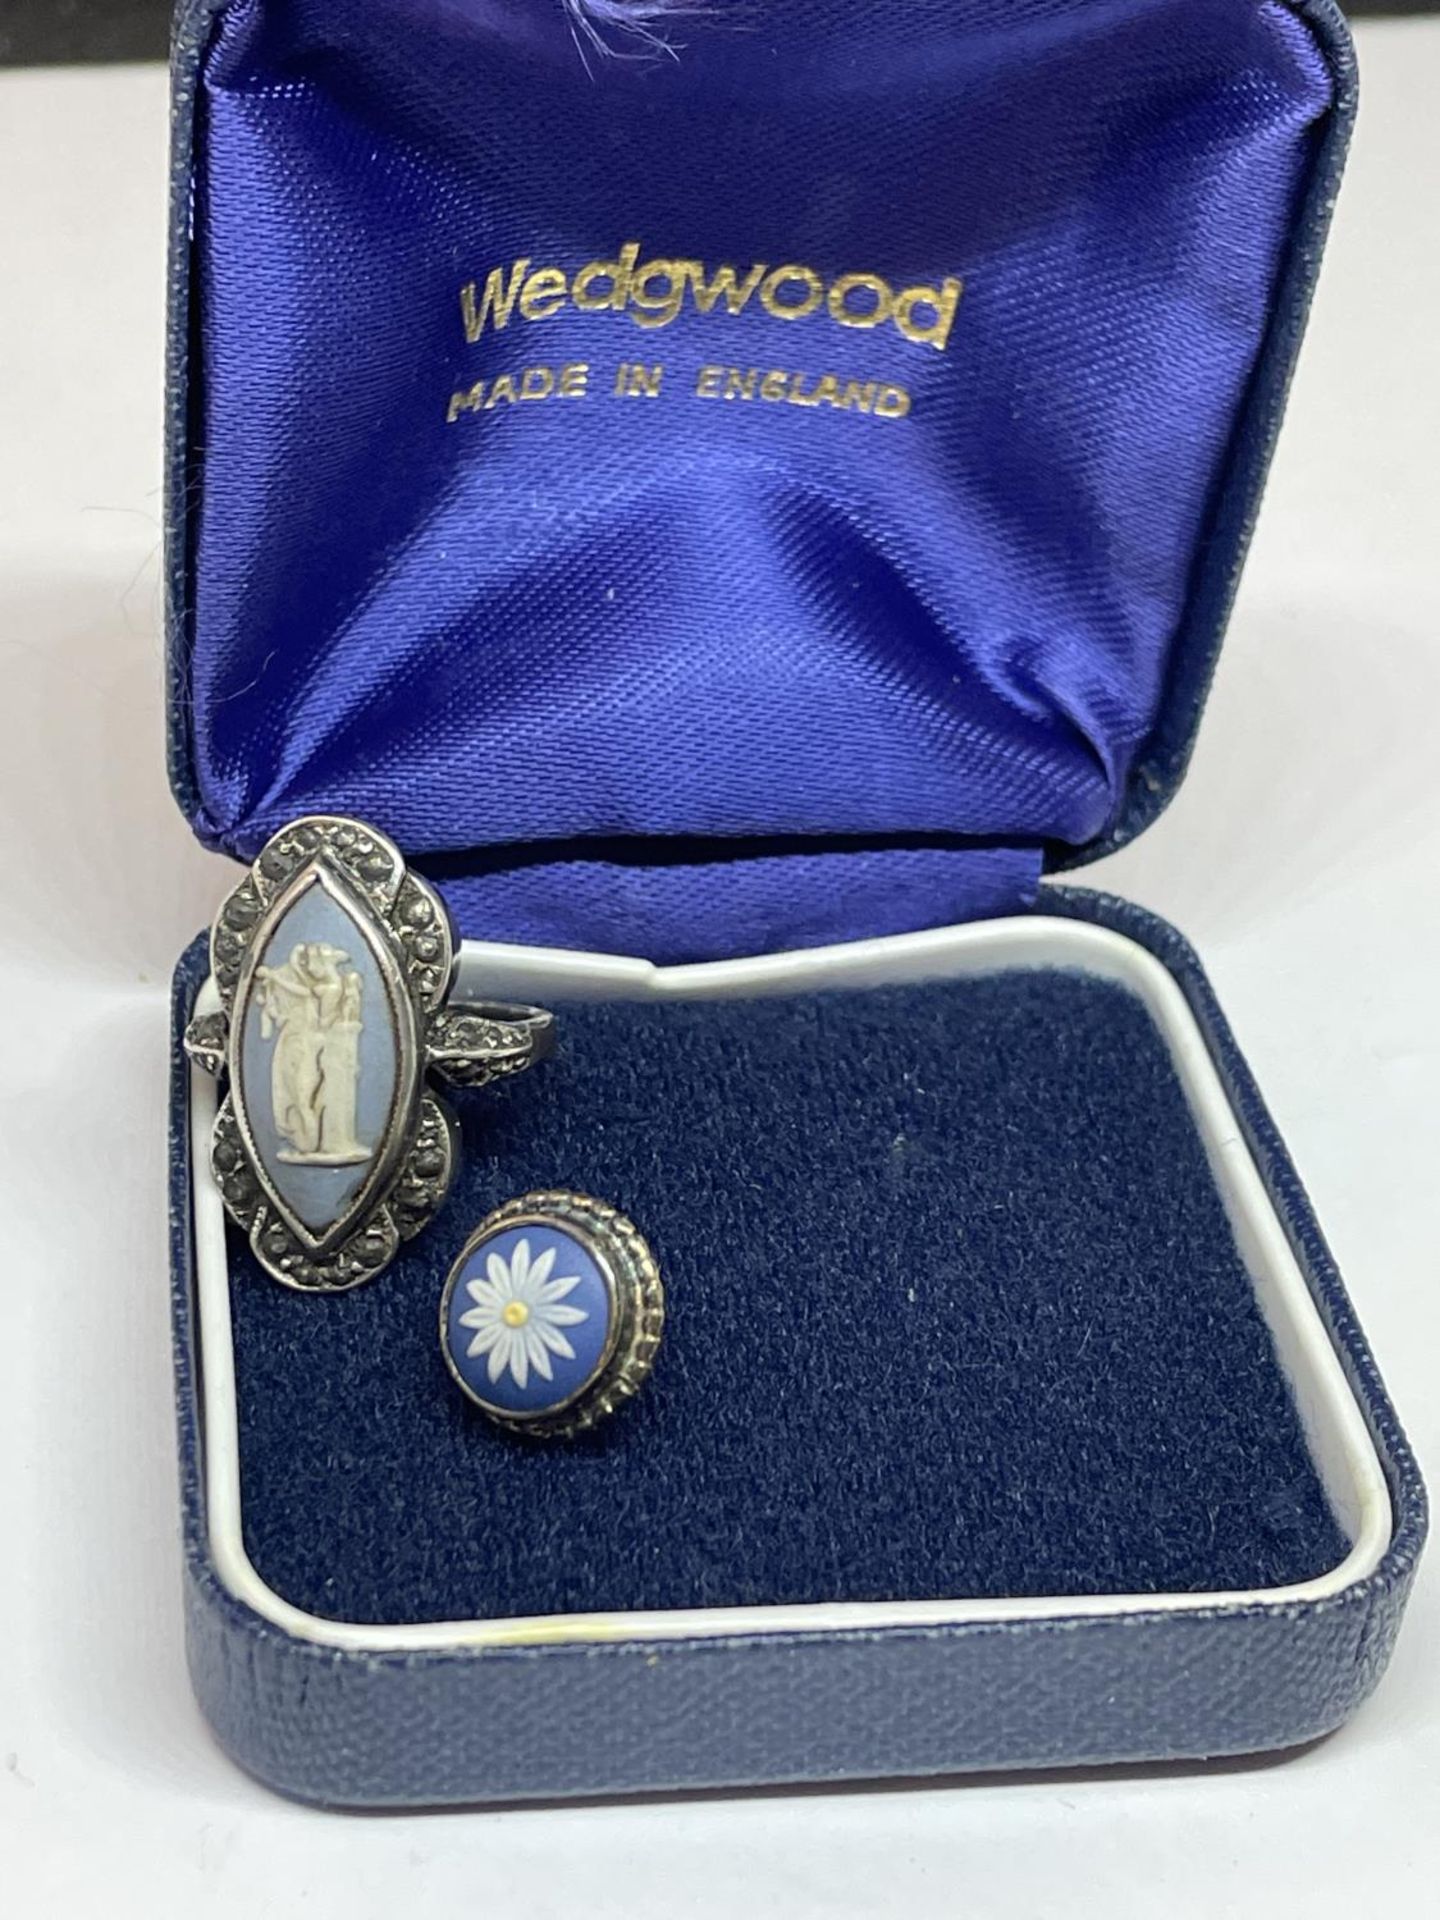 A WEDGWOOD SILVER RING AND SILVER STUD IN A PRESENTATION BOX